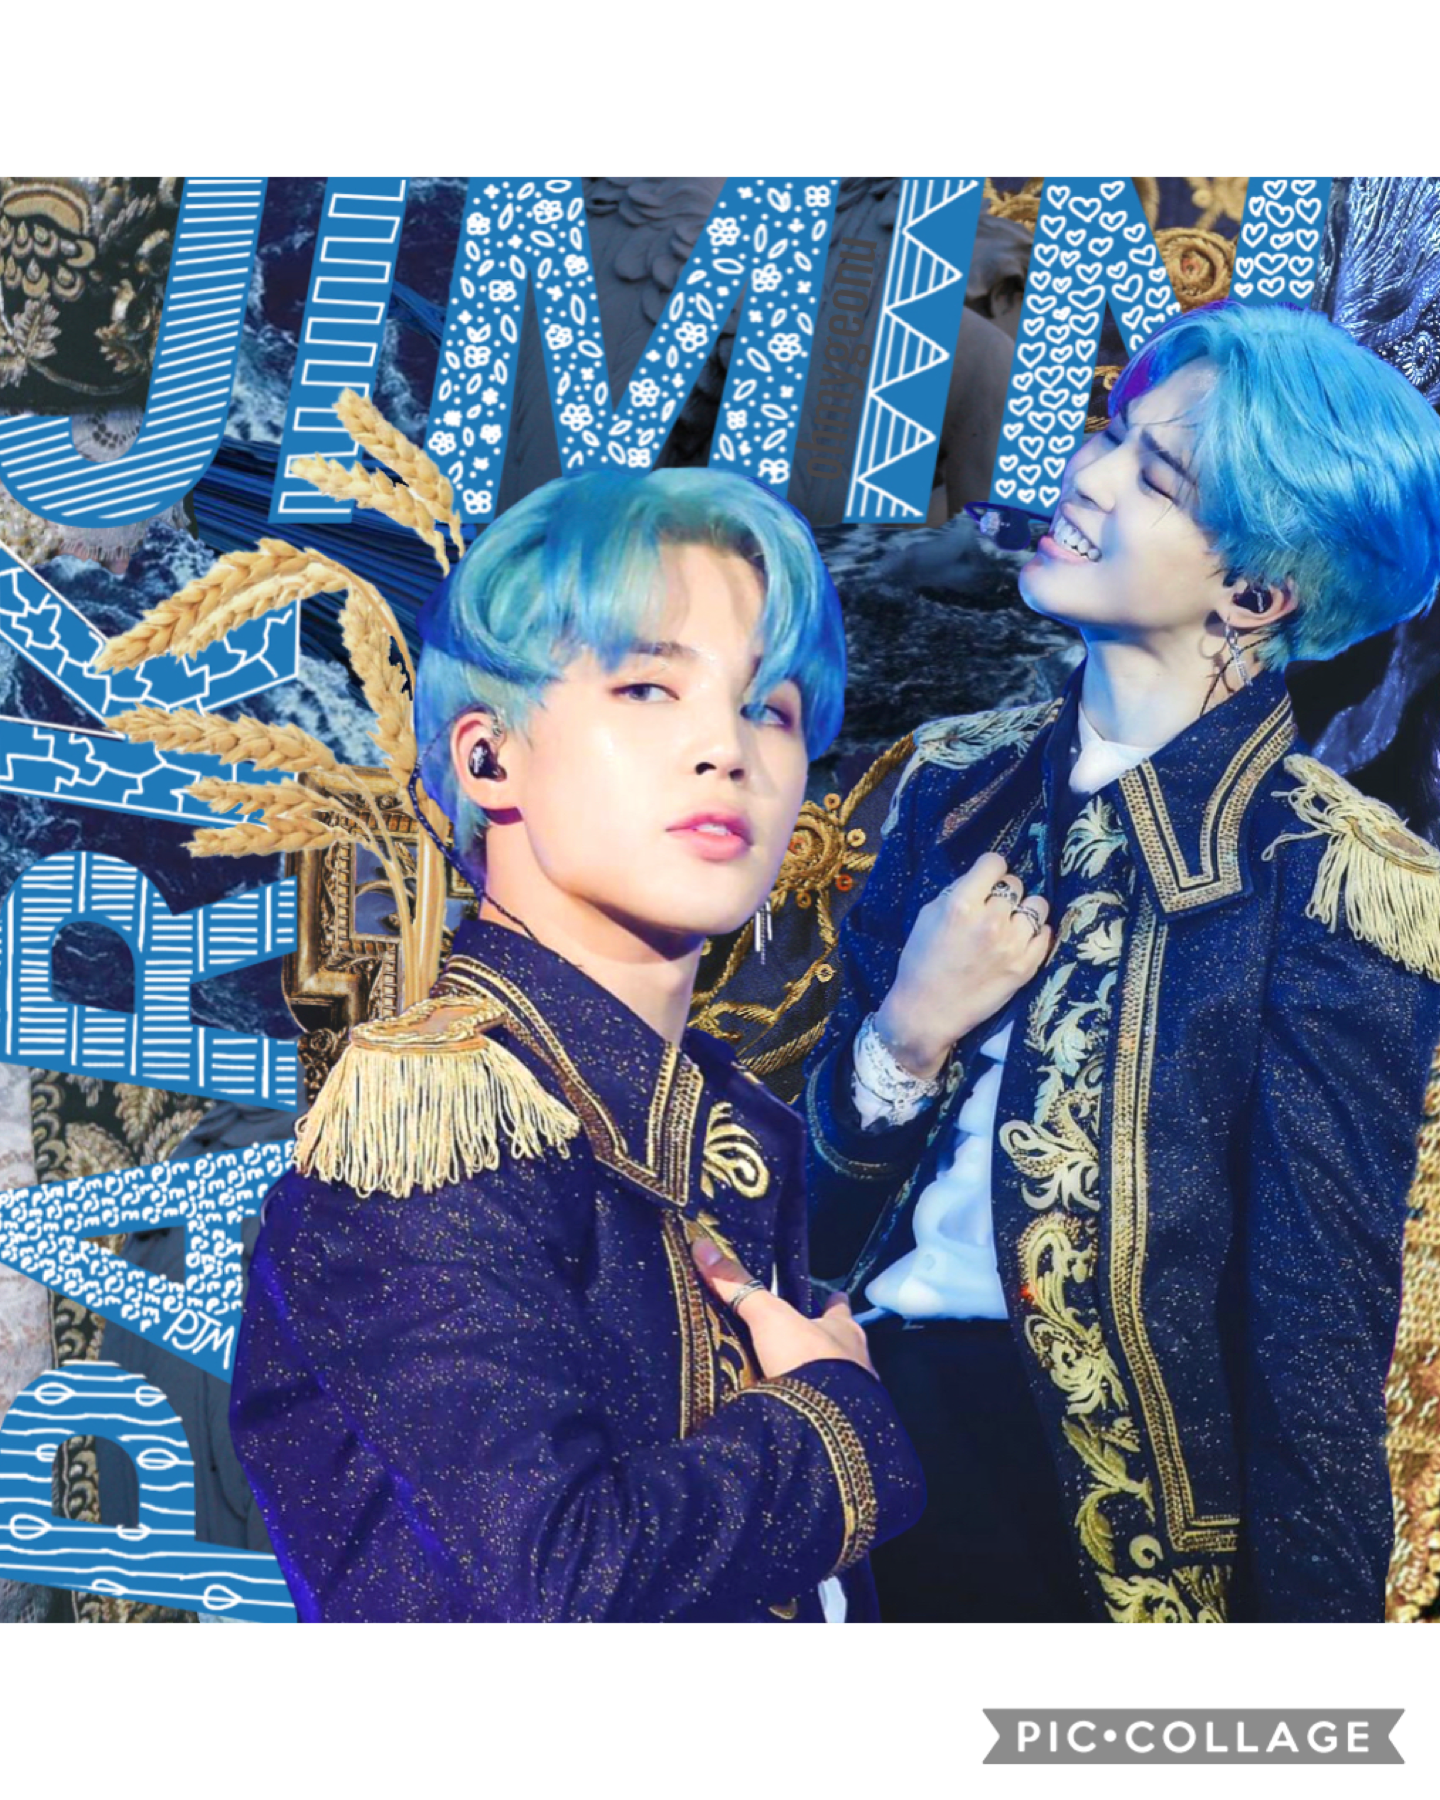 ||🦕|| PARK JIMIN ||🦕||

happy birthday to the sweetest, handsomest, most caring, most talented, and most passionate person I’ve ever ‘known’! happy bday jimin, don’t ever stop being yourself and keep on touching people’s hearts🥺 ; he’s already 25 cries ; 